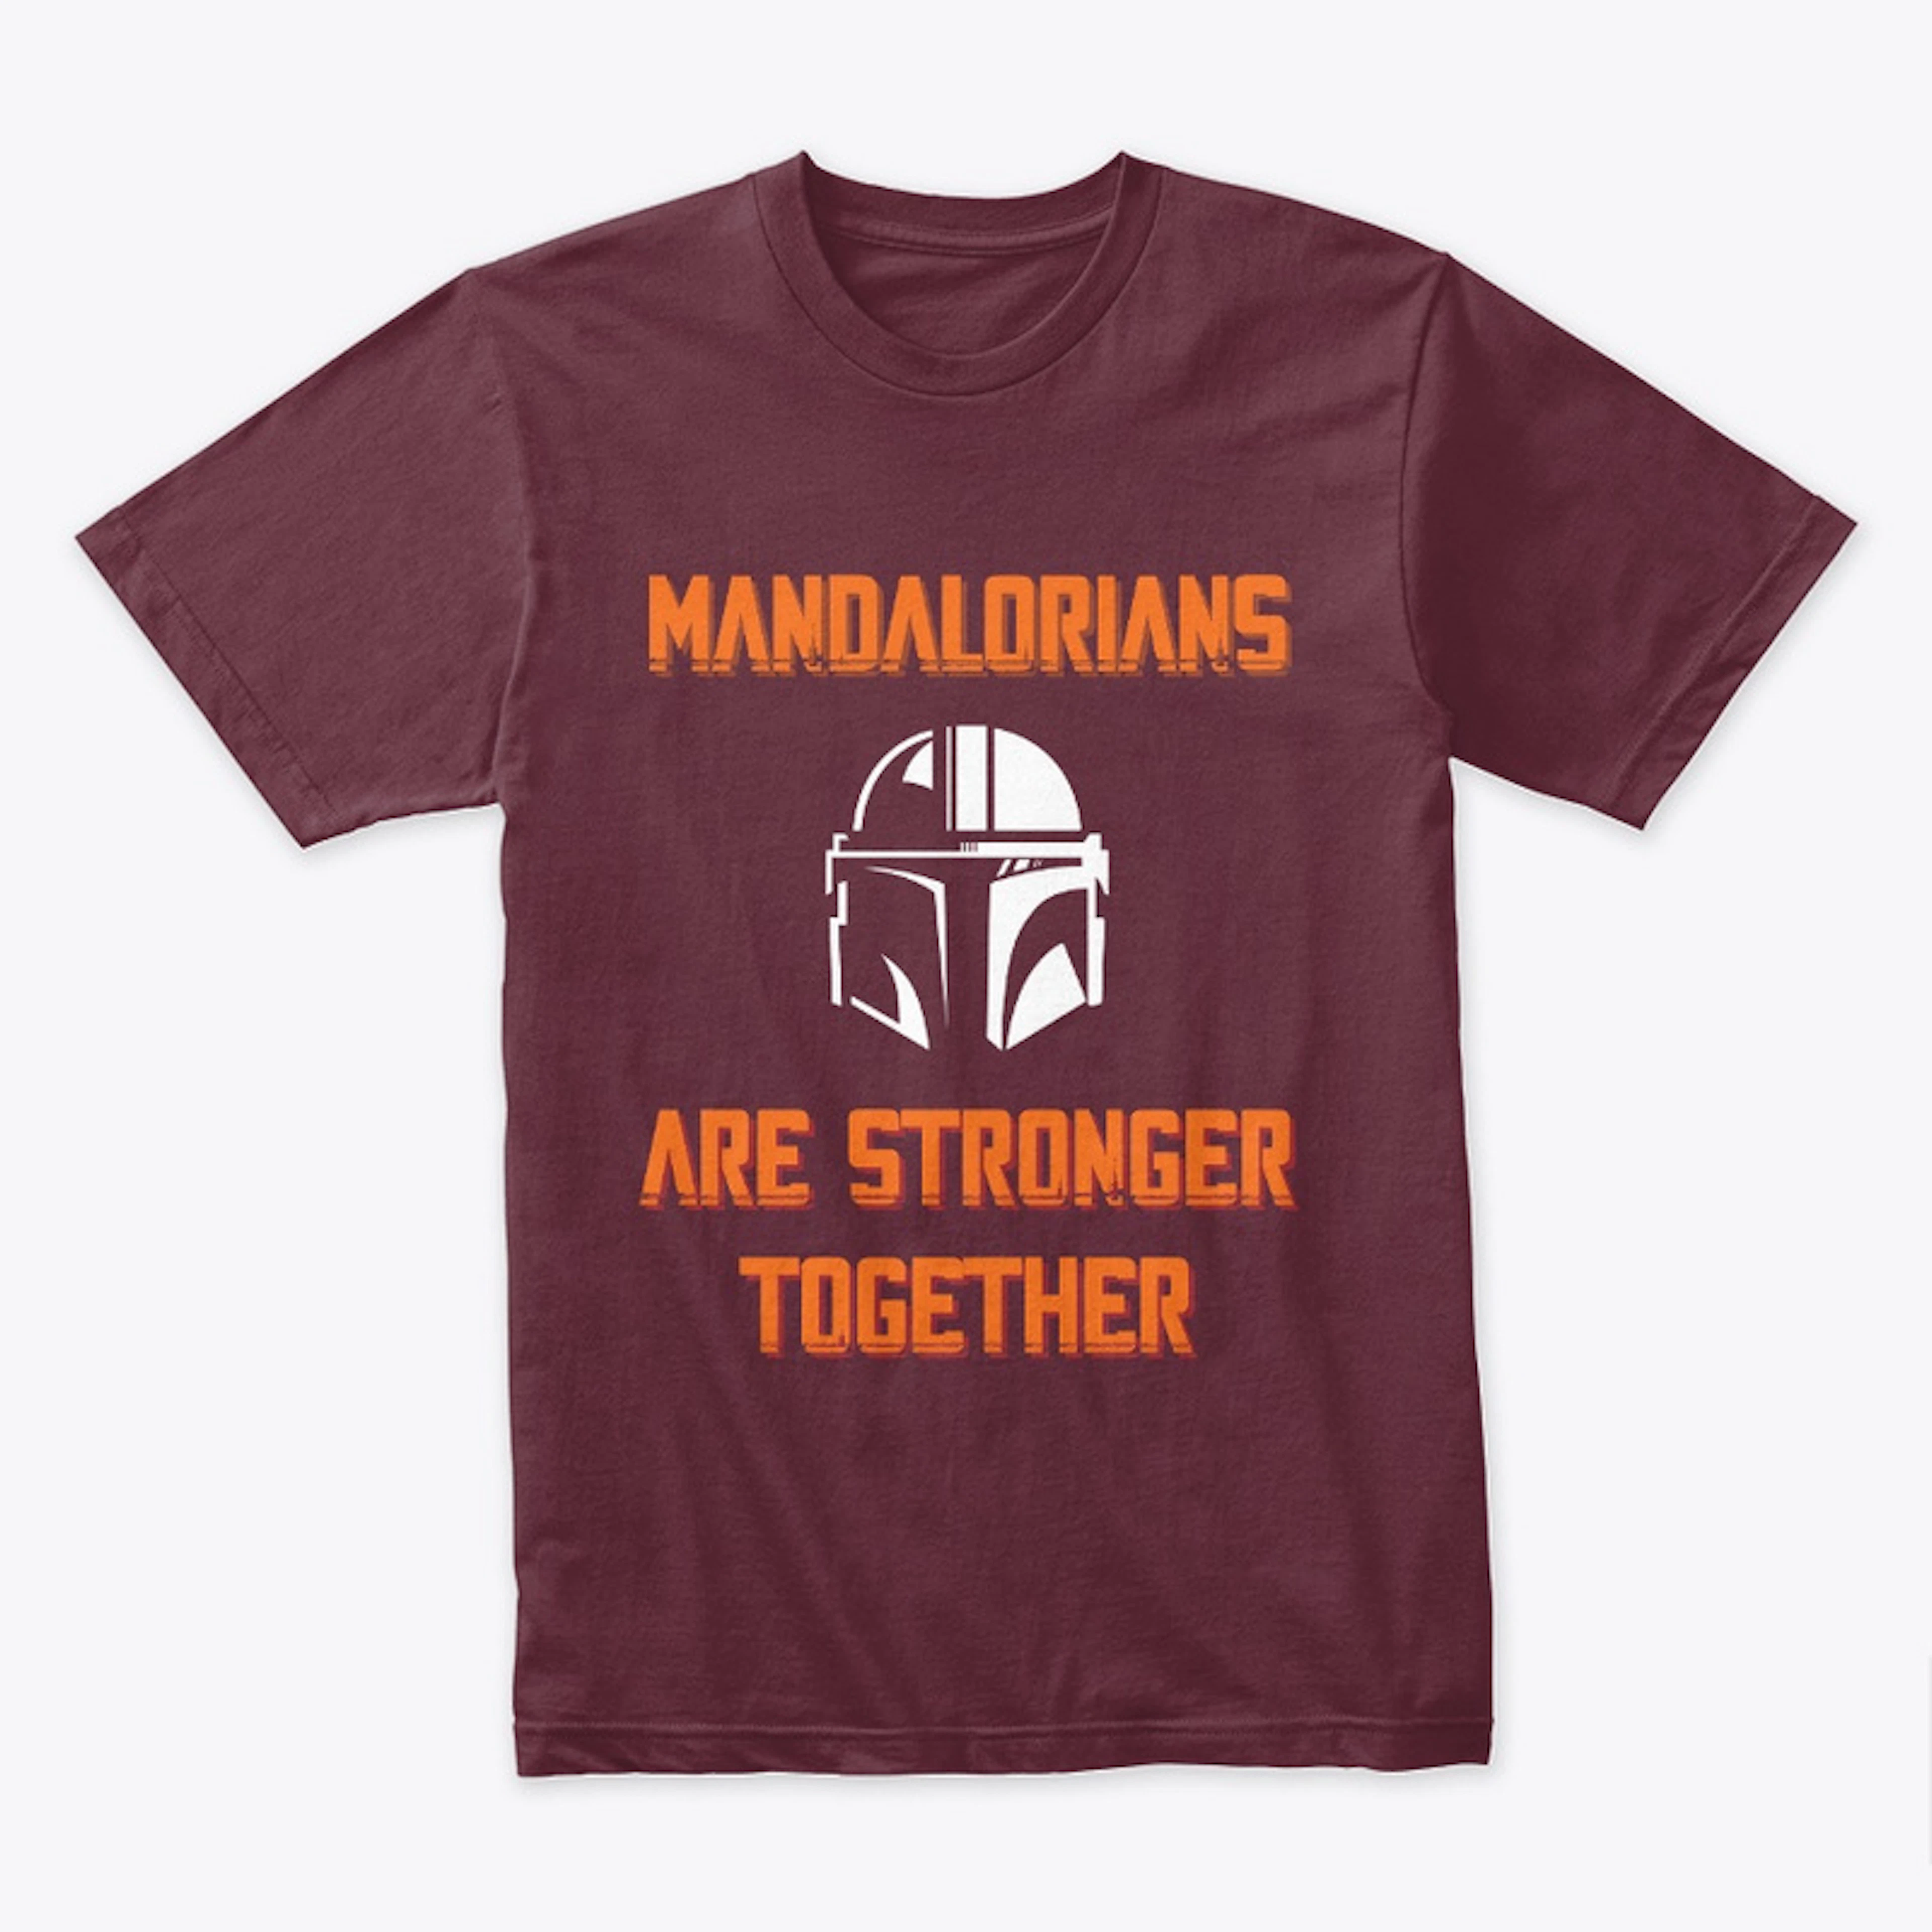 Mandalorians are stronger together